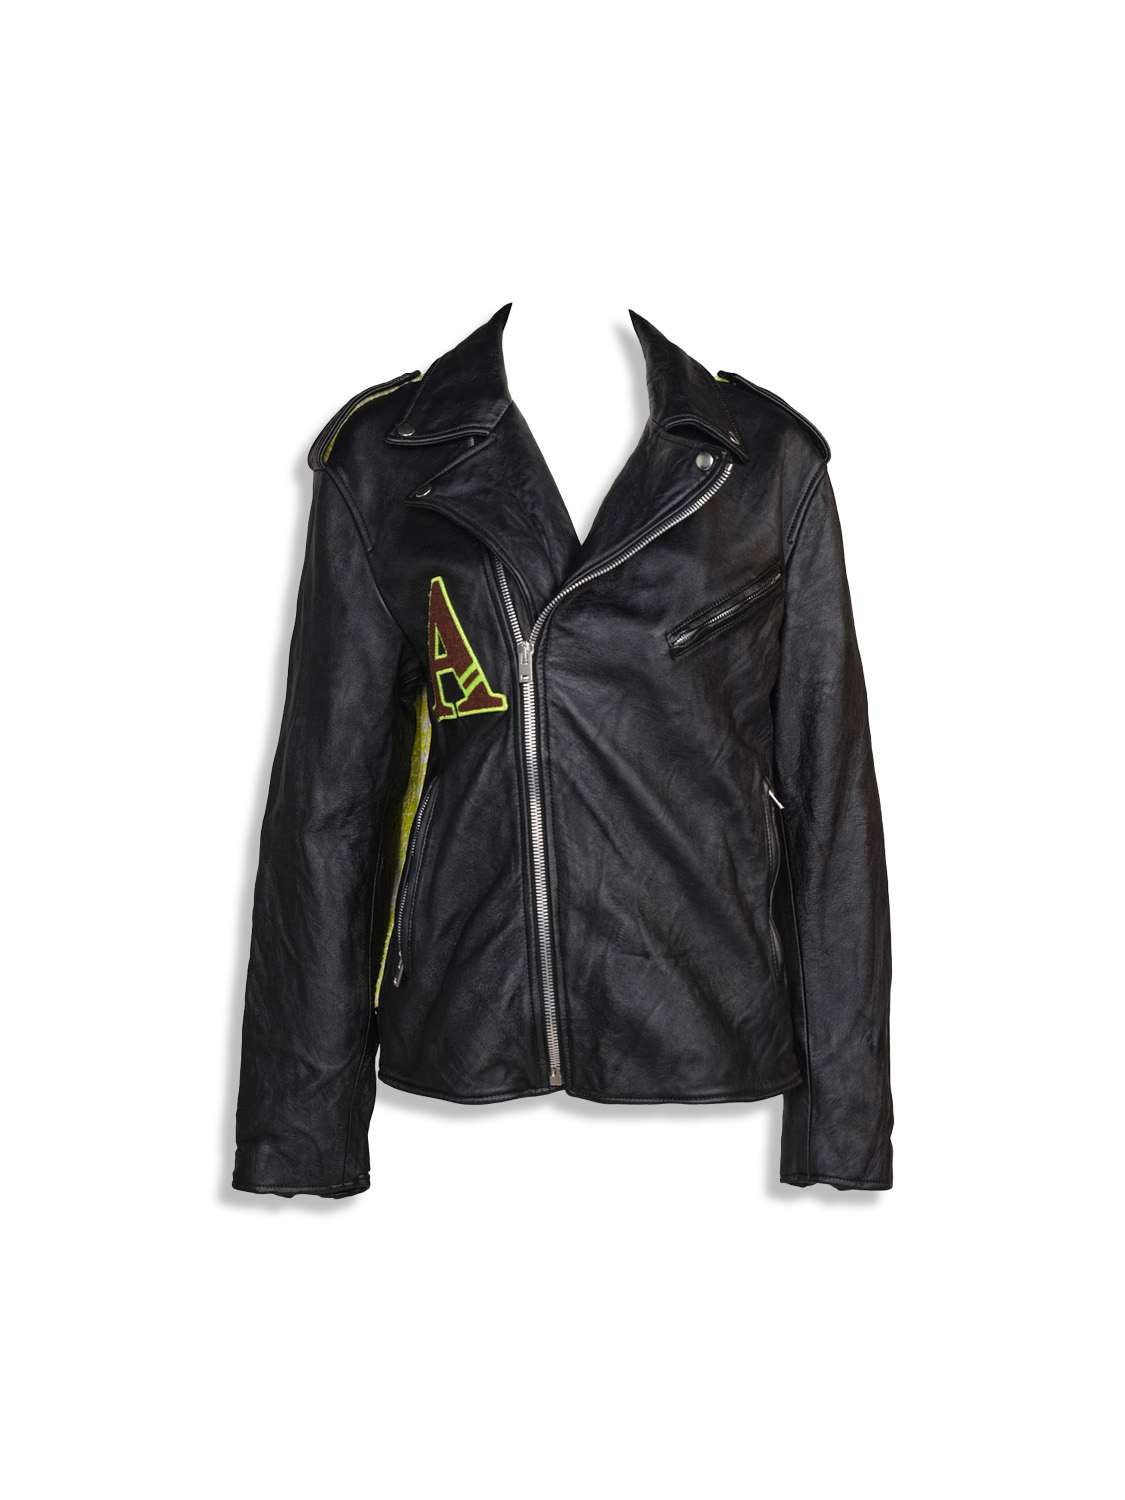 Al Ain Kefiah - Leather jacket in biker style with patch design black One Size